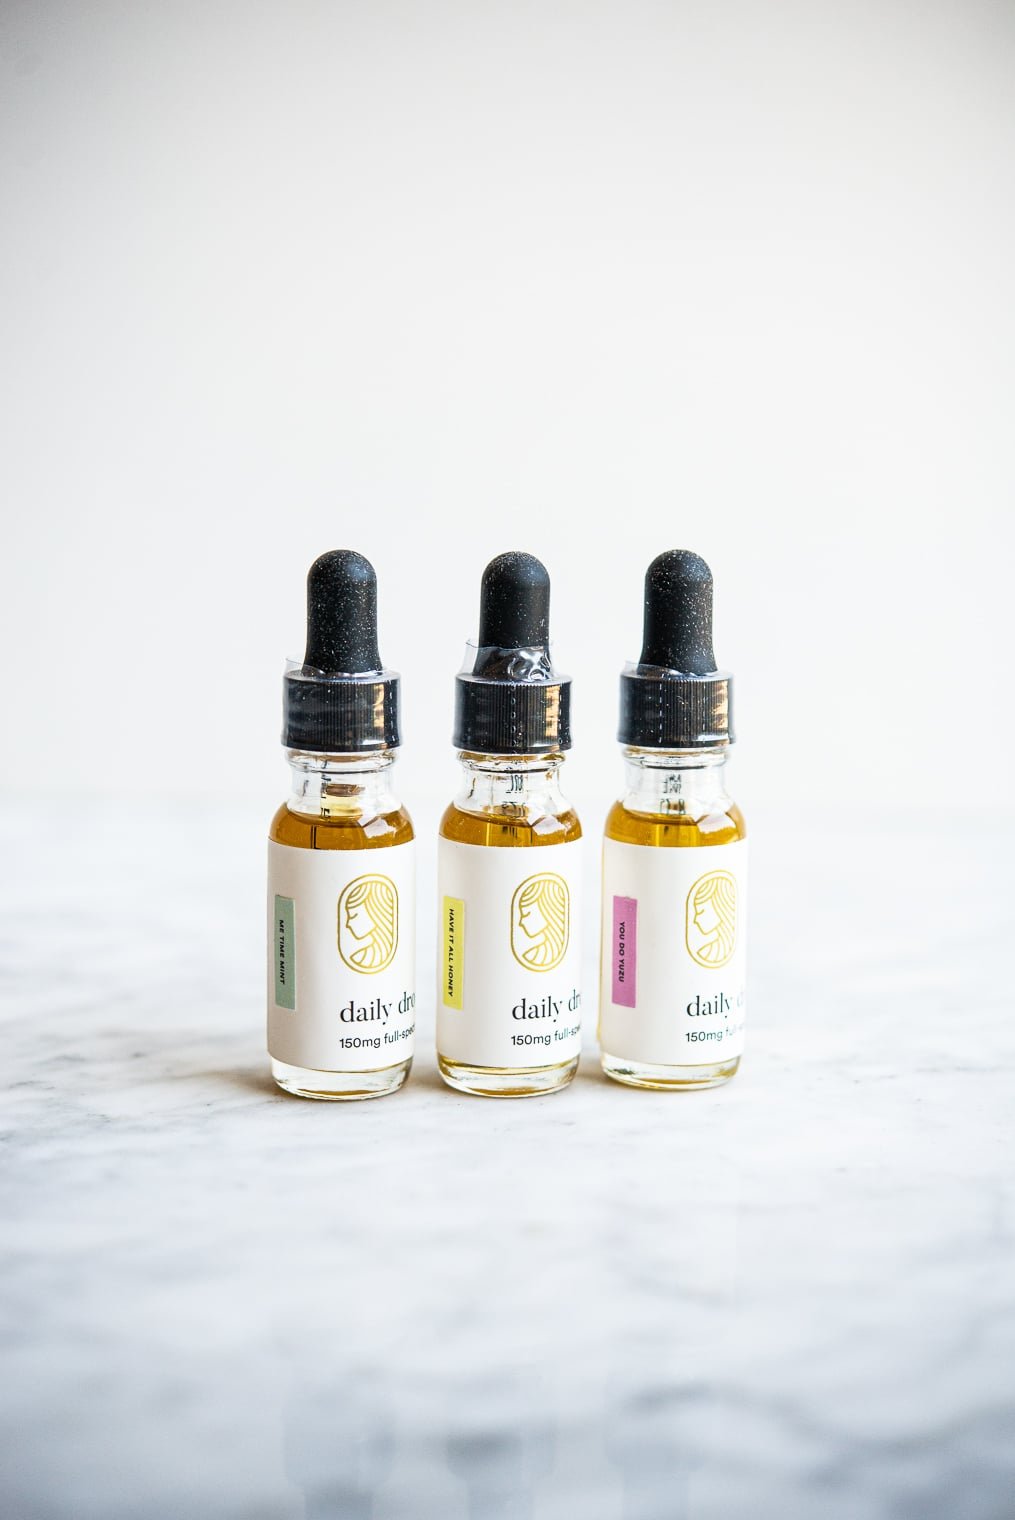 3 bottles of cbd oil lined up in a row on a marble surface